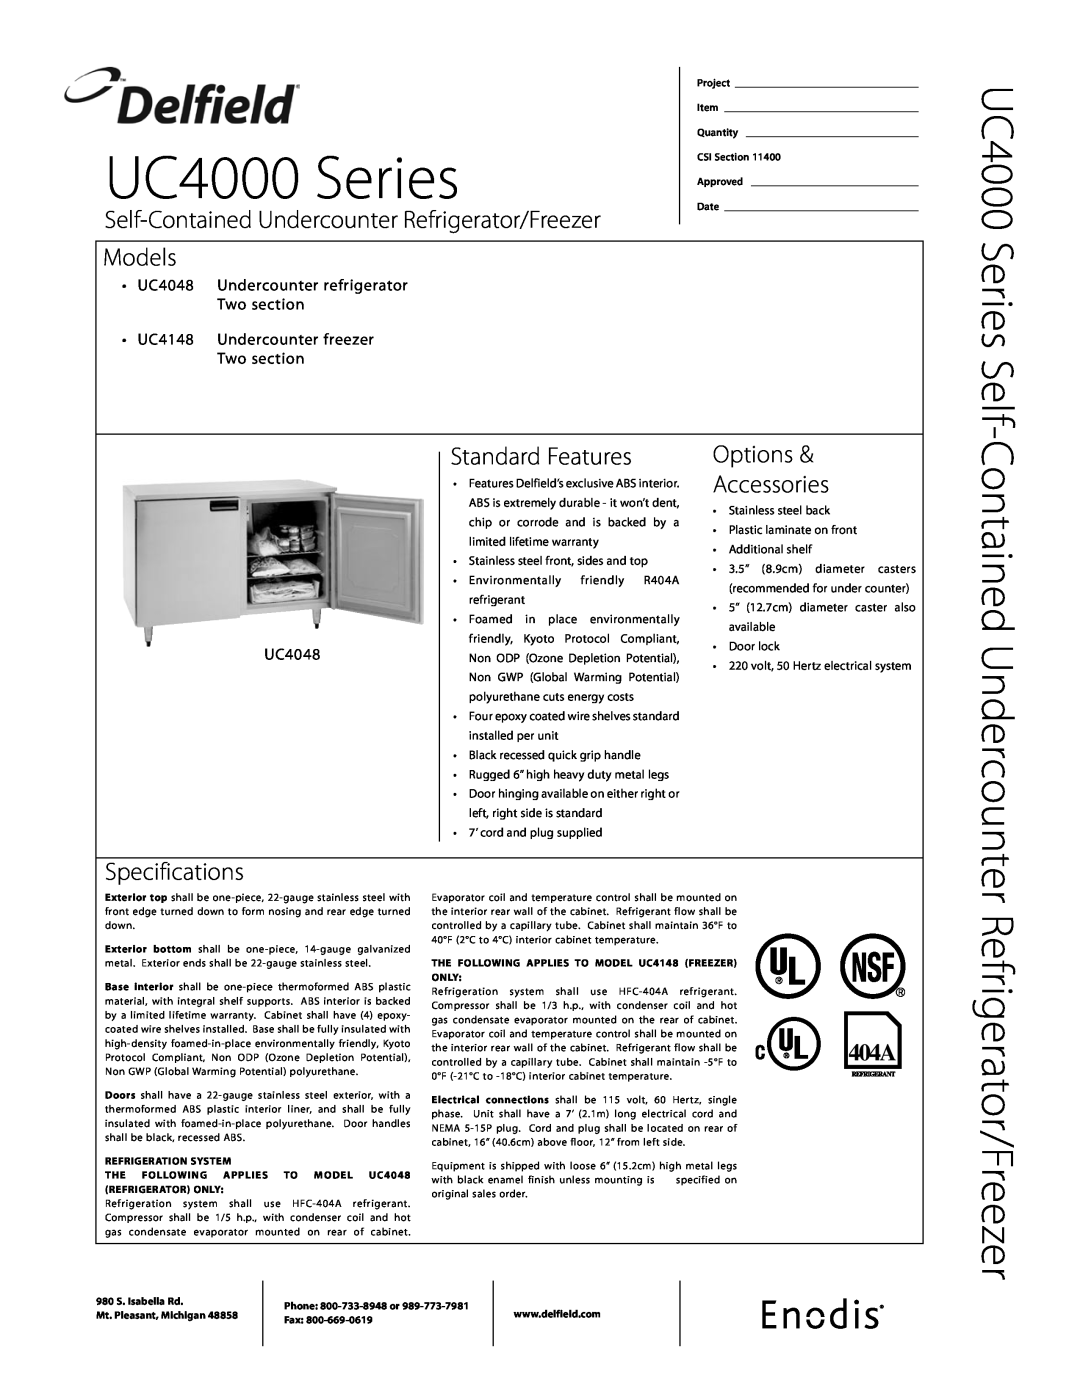 Delfield UC4048, UC4148 specifications Refrigerator/Freezer, UC4000 Series Self, Contained Undercounter, Models 